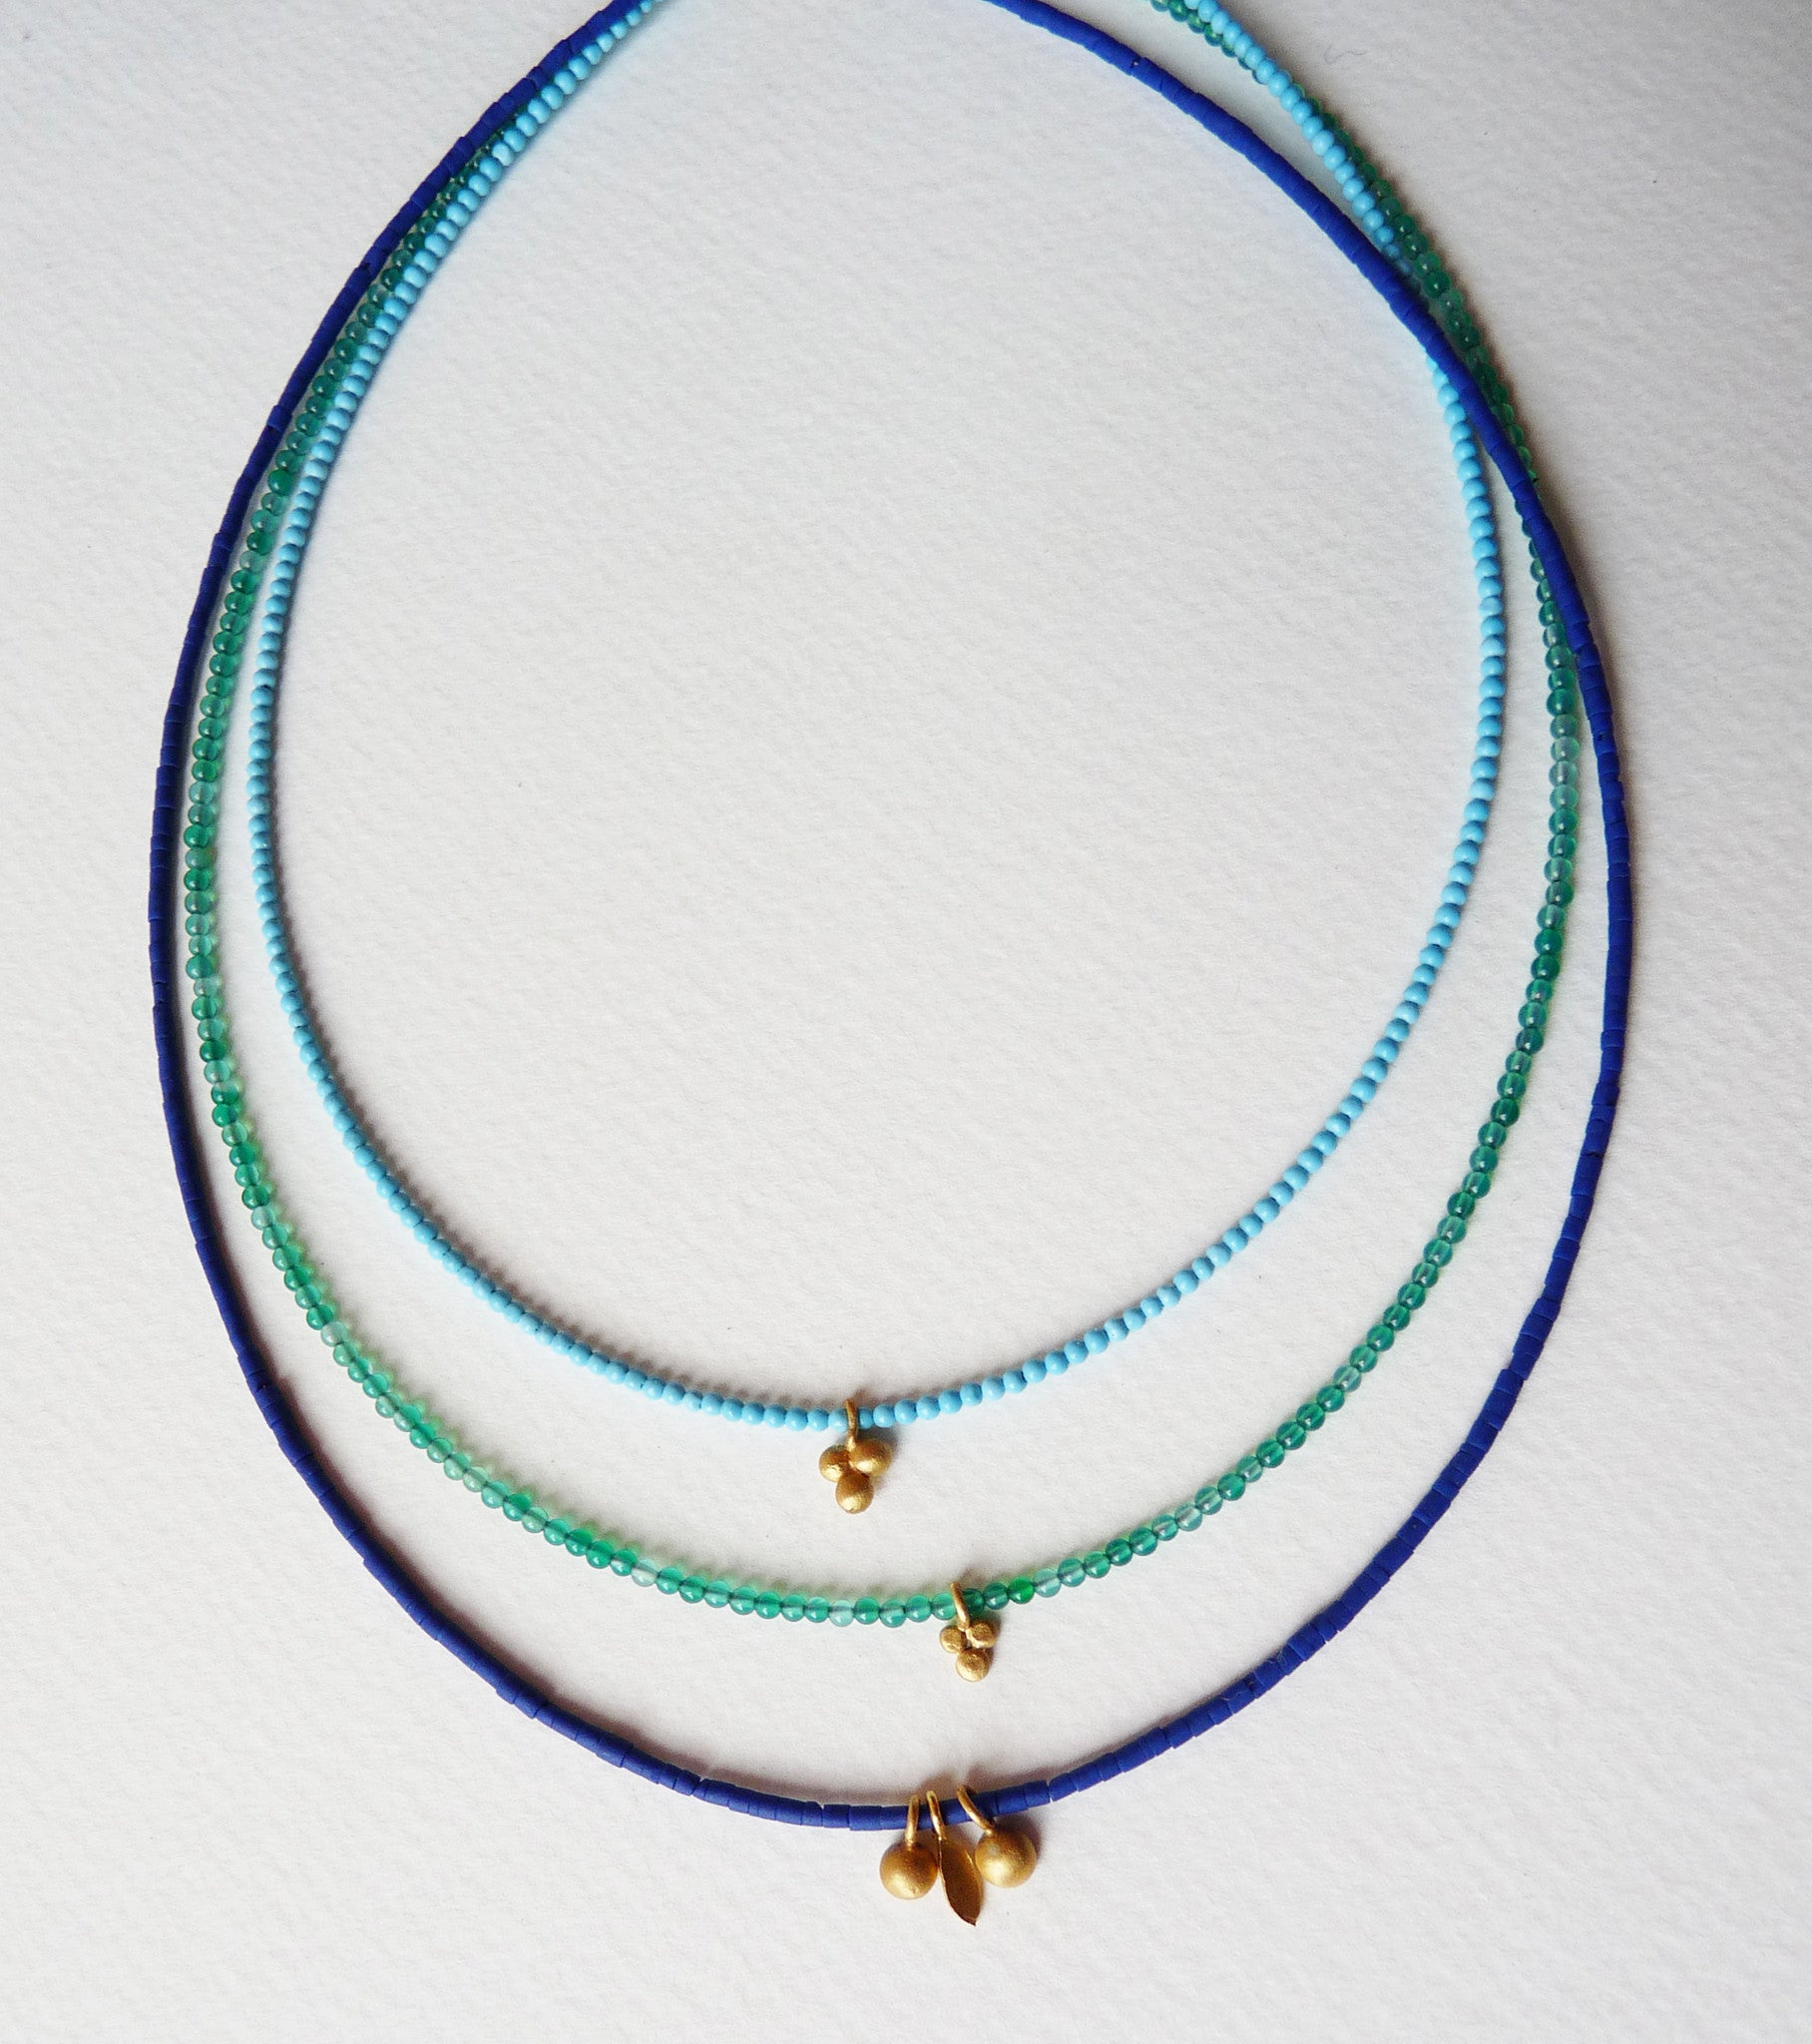 blossoming, branch, sterling, silver, necklace, handmade, jewellery, jewelry, turquoise, 18ct, gold, plate, delicate